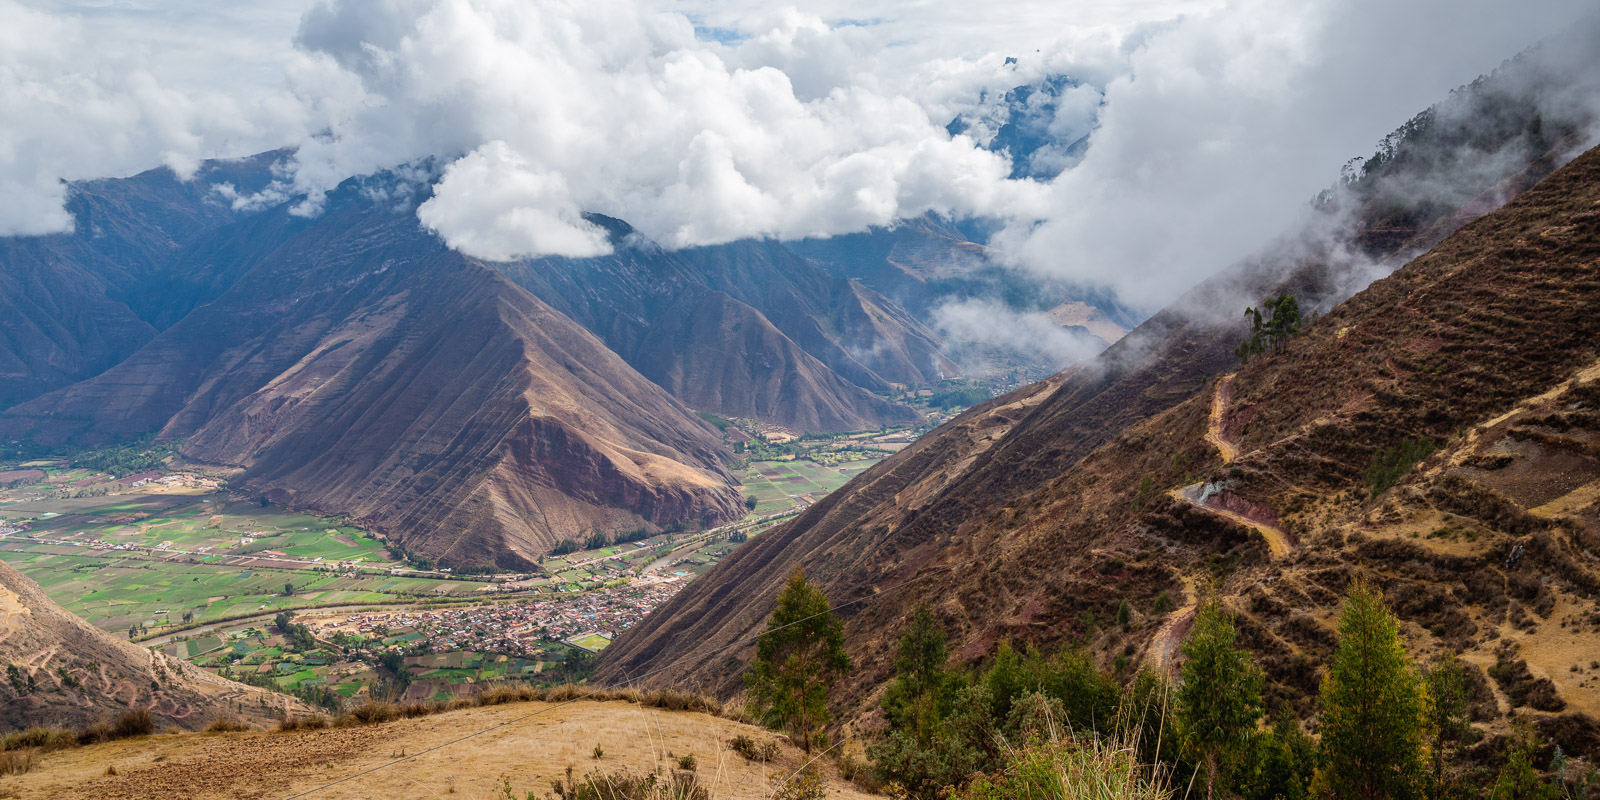 View into a lush valley from an overlook on the highway to Ollantaytambo.